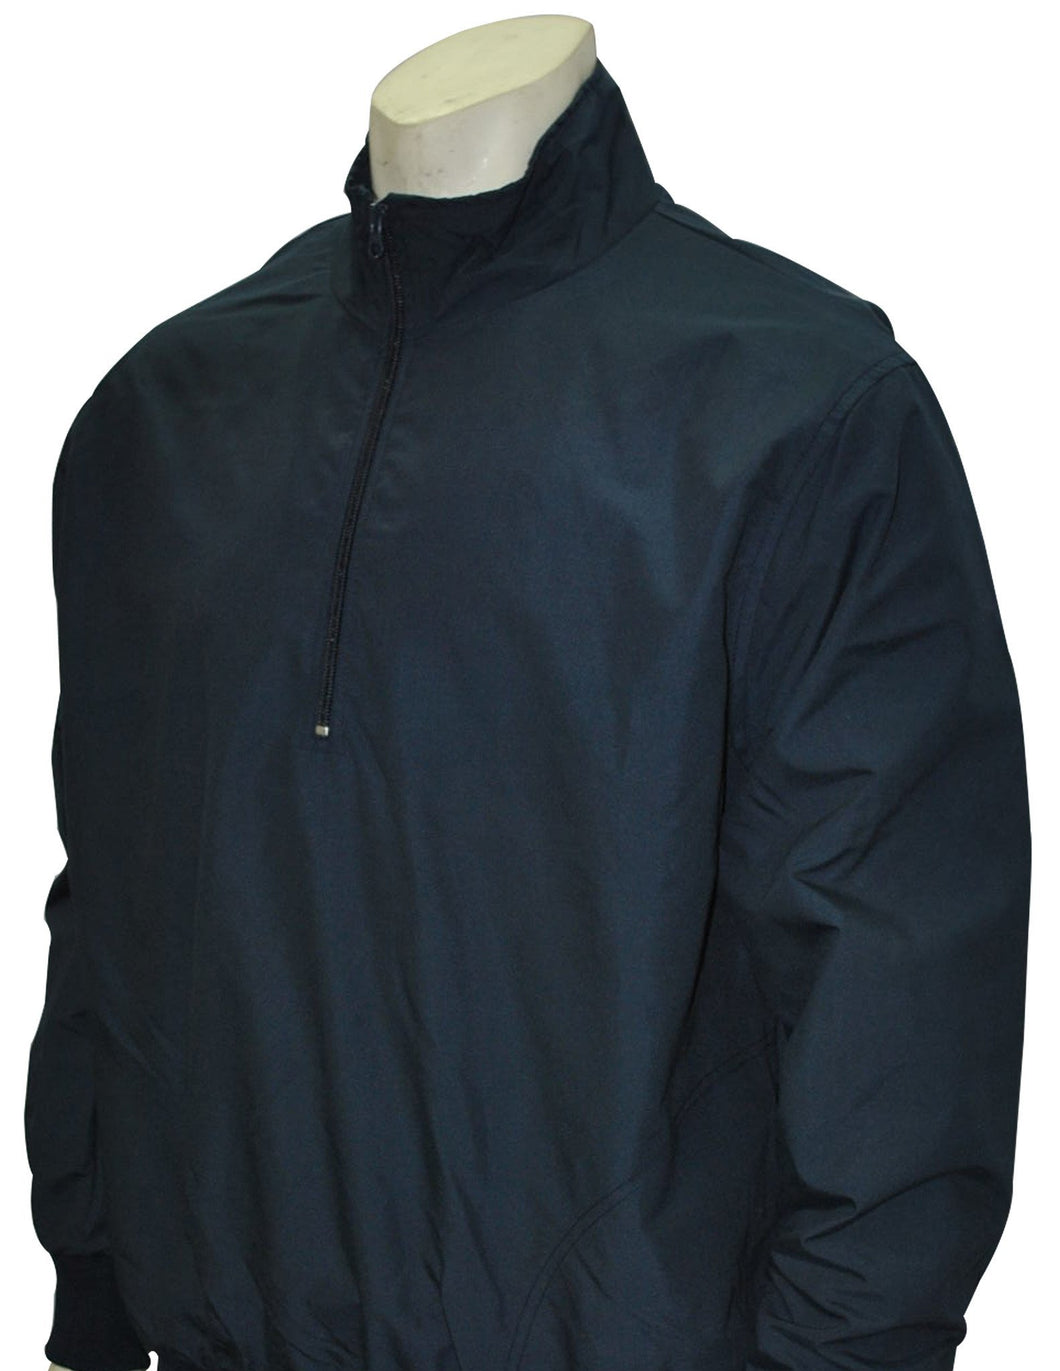 BBS321-Solid Navy Half Zip Umpire Pullover - Available in Navy Only